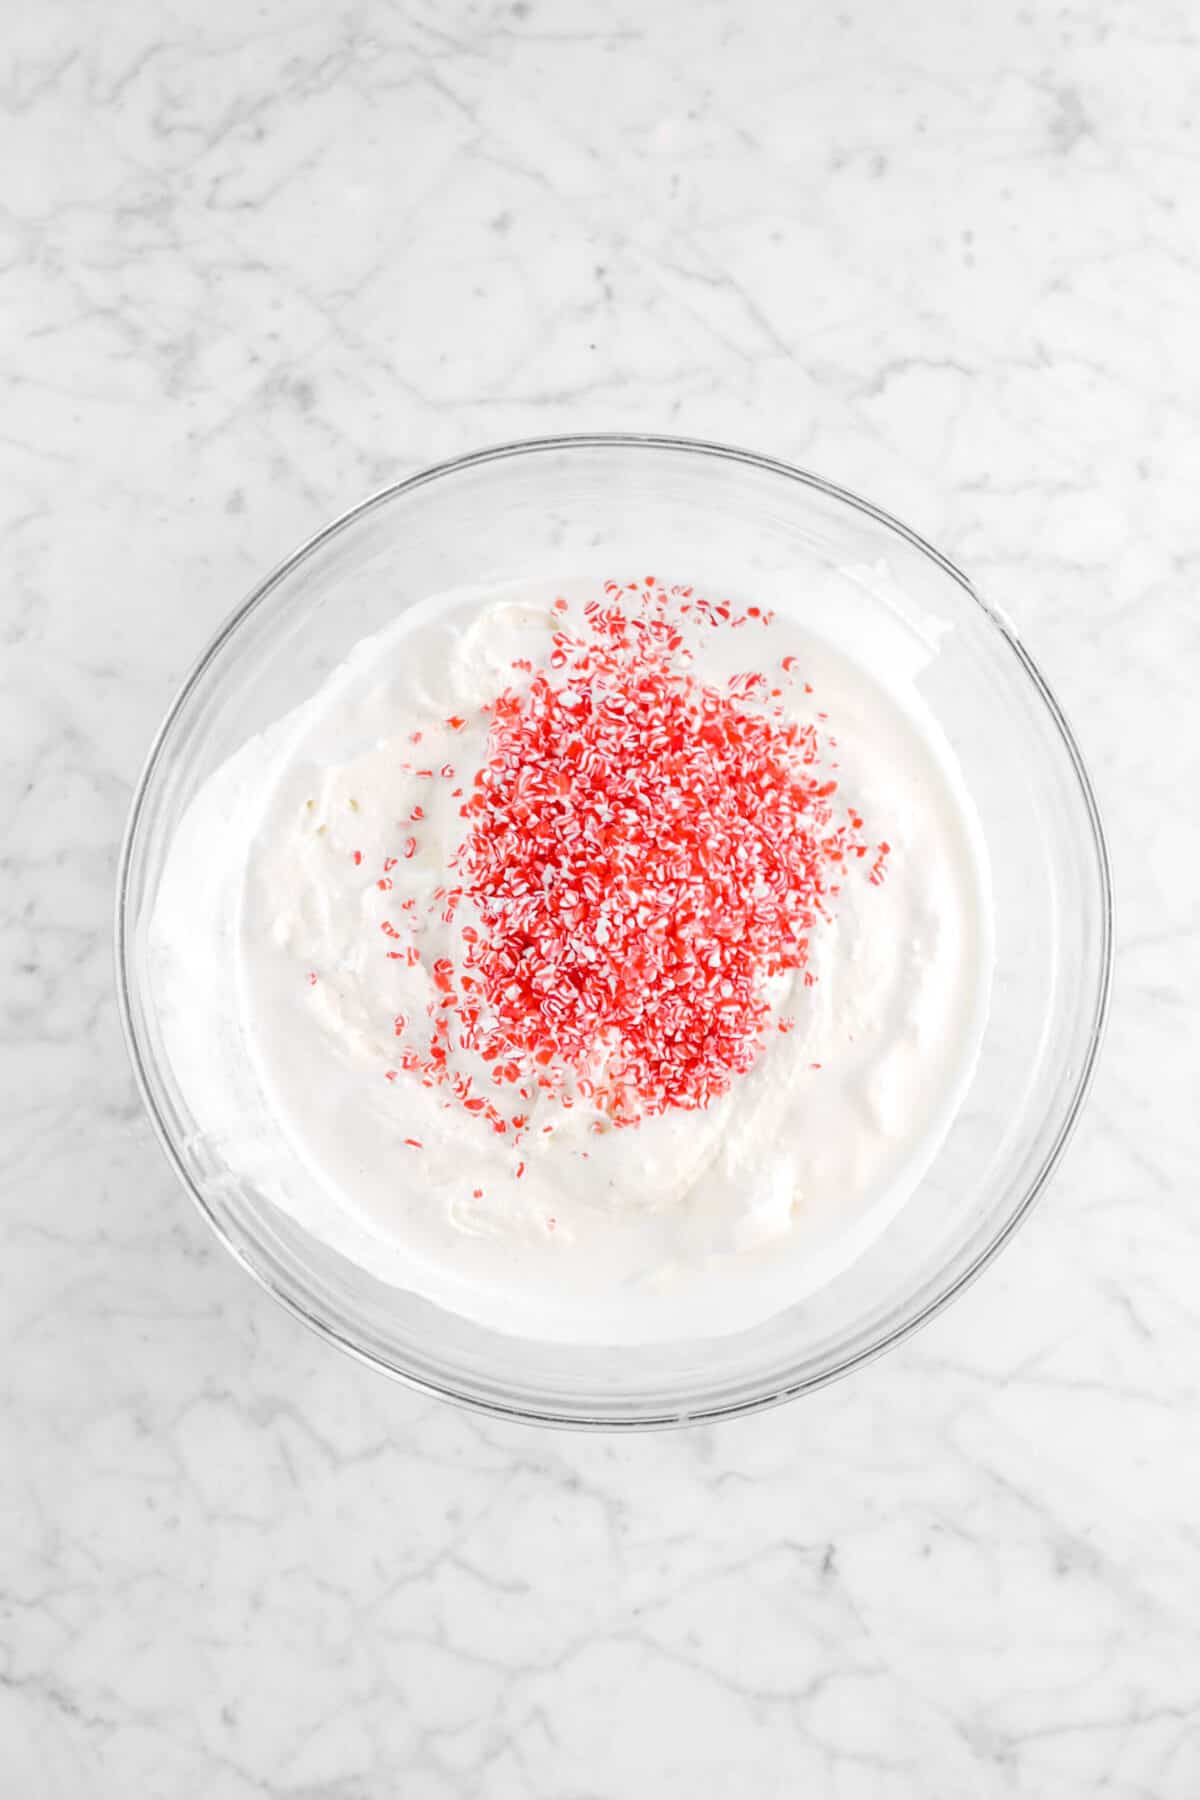 peppermint pieces added to ice cream in glass bowl